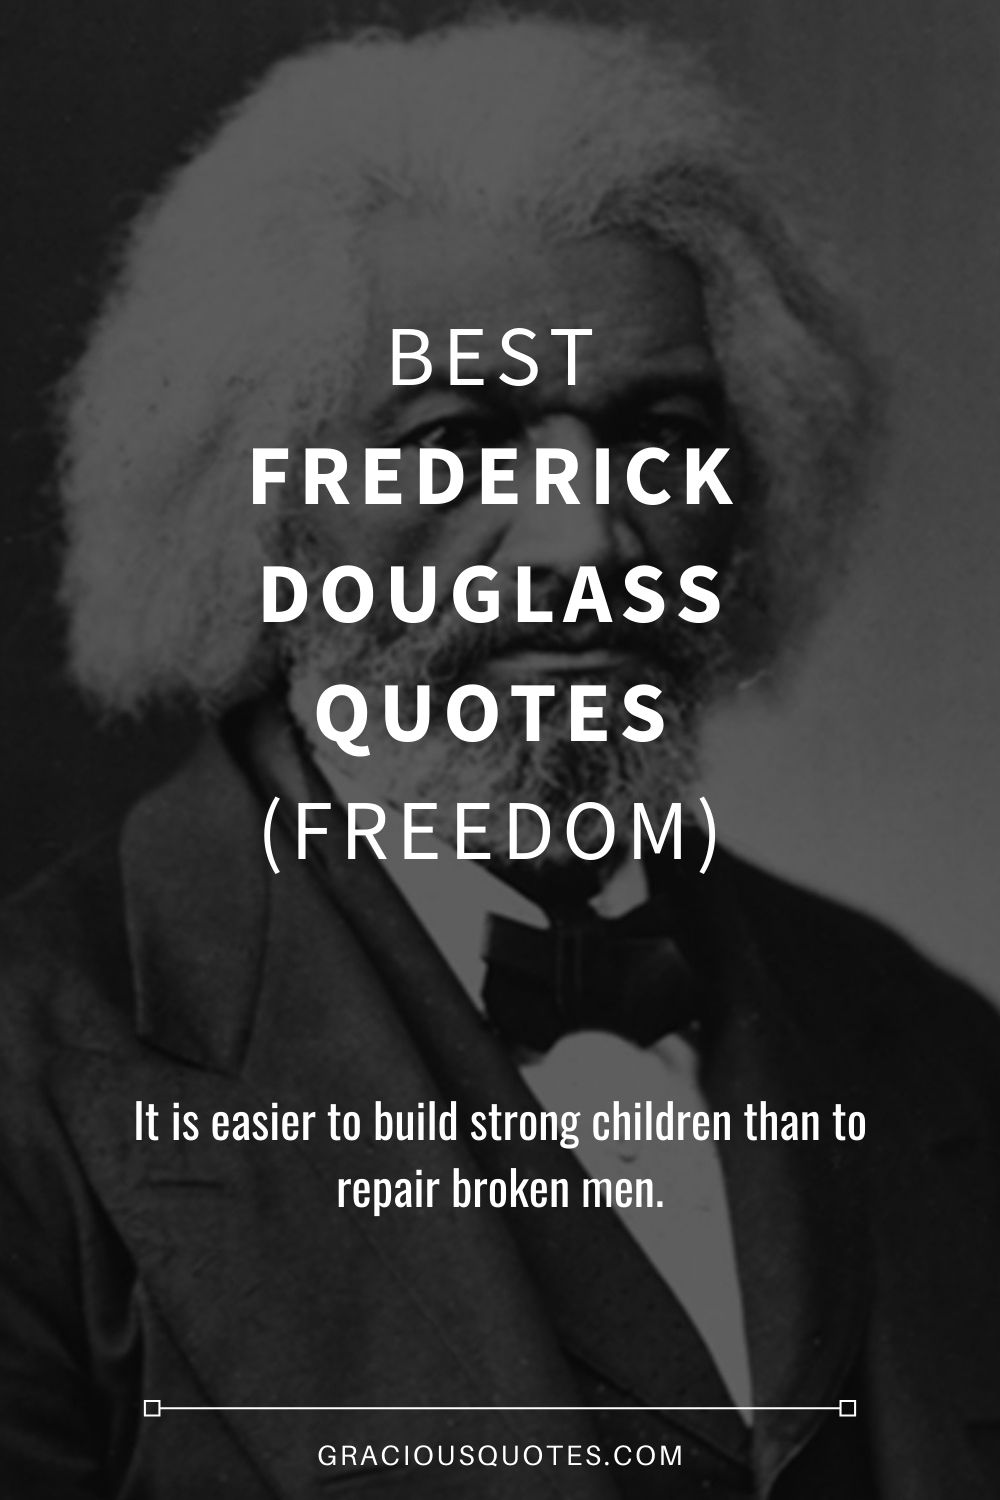 Best Frederick Douglass Quotes (FREEDOM) - Gracious Quotes